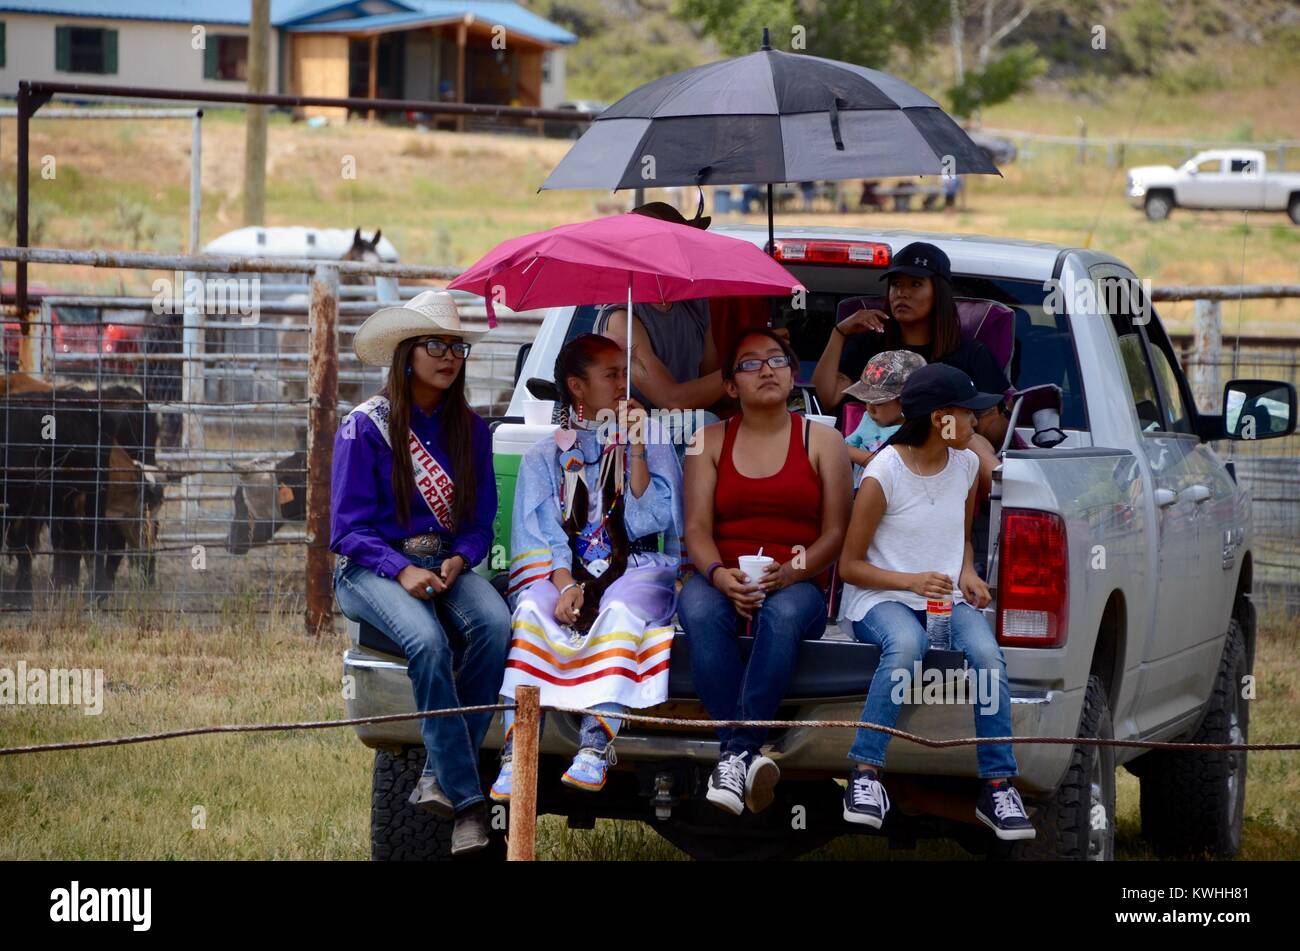 Ragazze in pony express 2017 in dulce jicarillo apache indian reservation Foto Stock